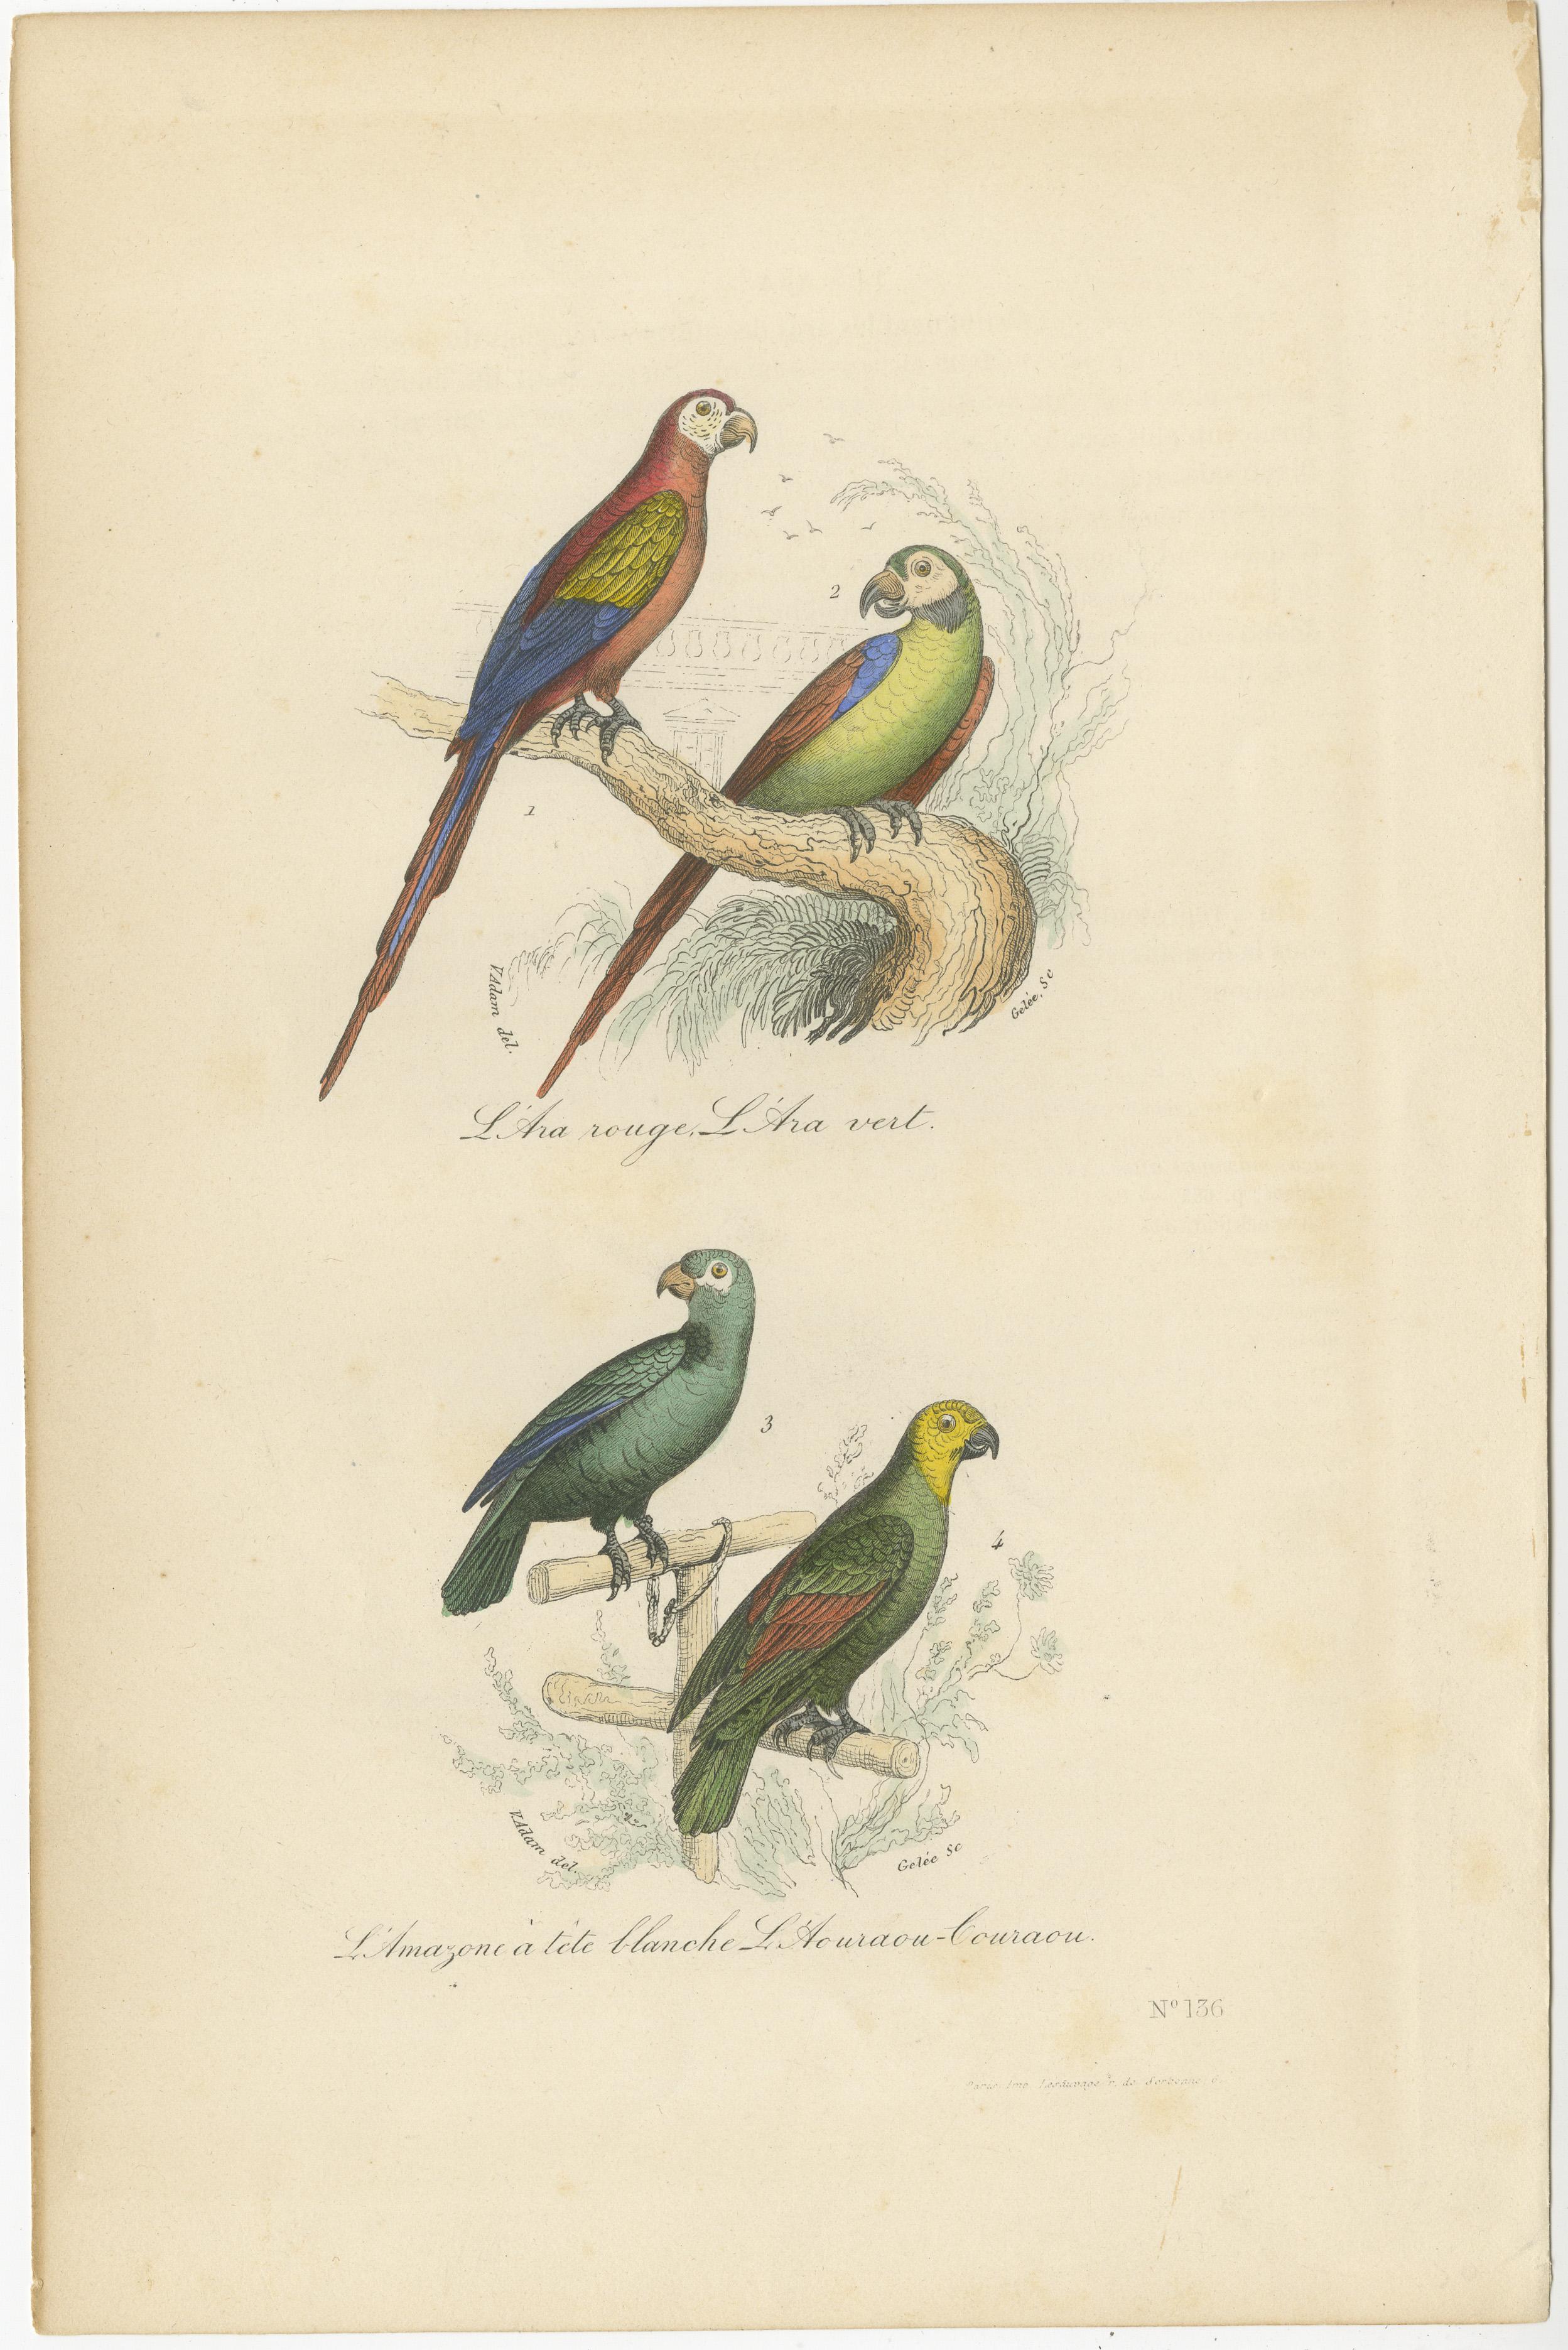 Antique print titled 'L'Ara rouge, L'Ara vert; L'Amazone a tete blanche, L'Aouraou-bouraou'. Original old print of 1. The red Macaw, 2. The green Macaw, 3. The Amazon parrot, 4. The Bouraoucon. Originates from 